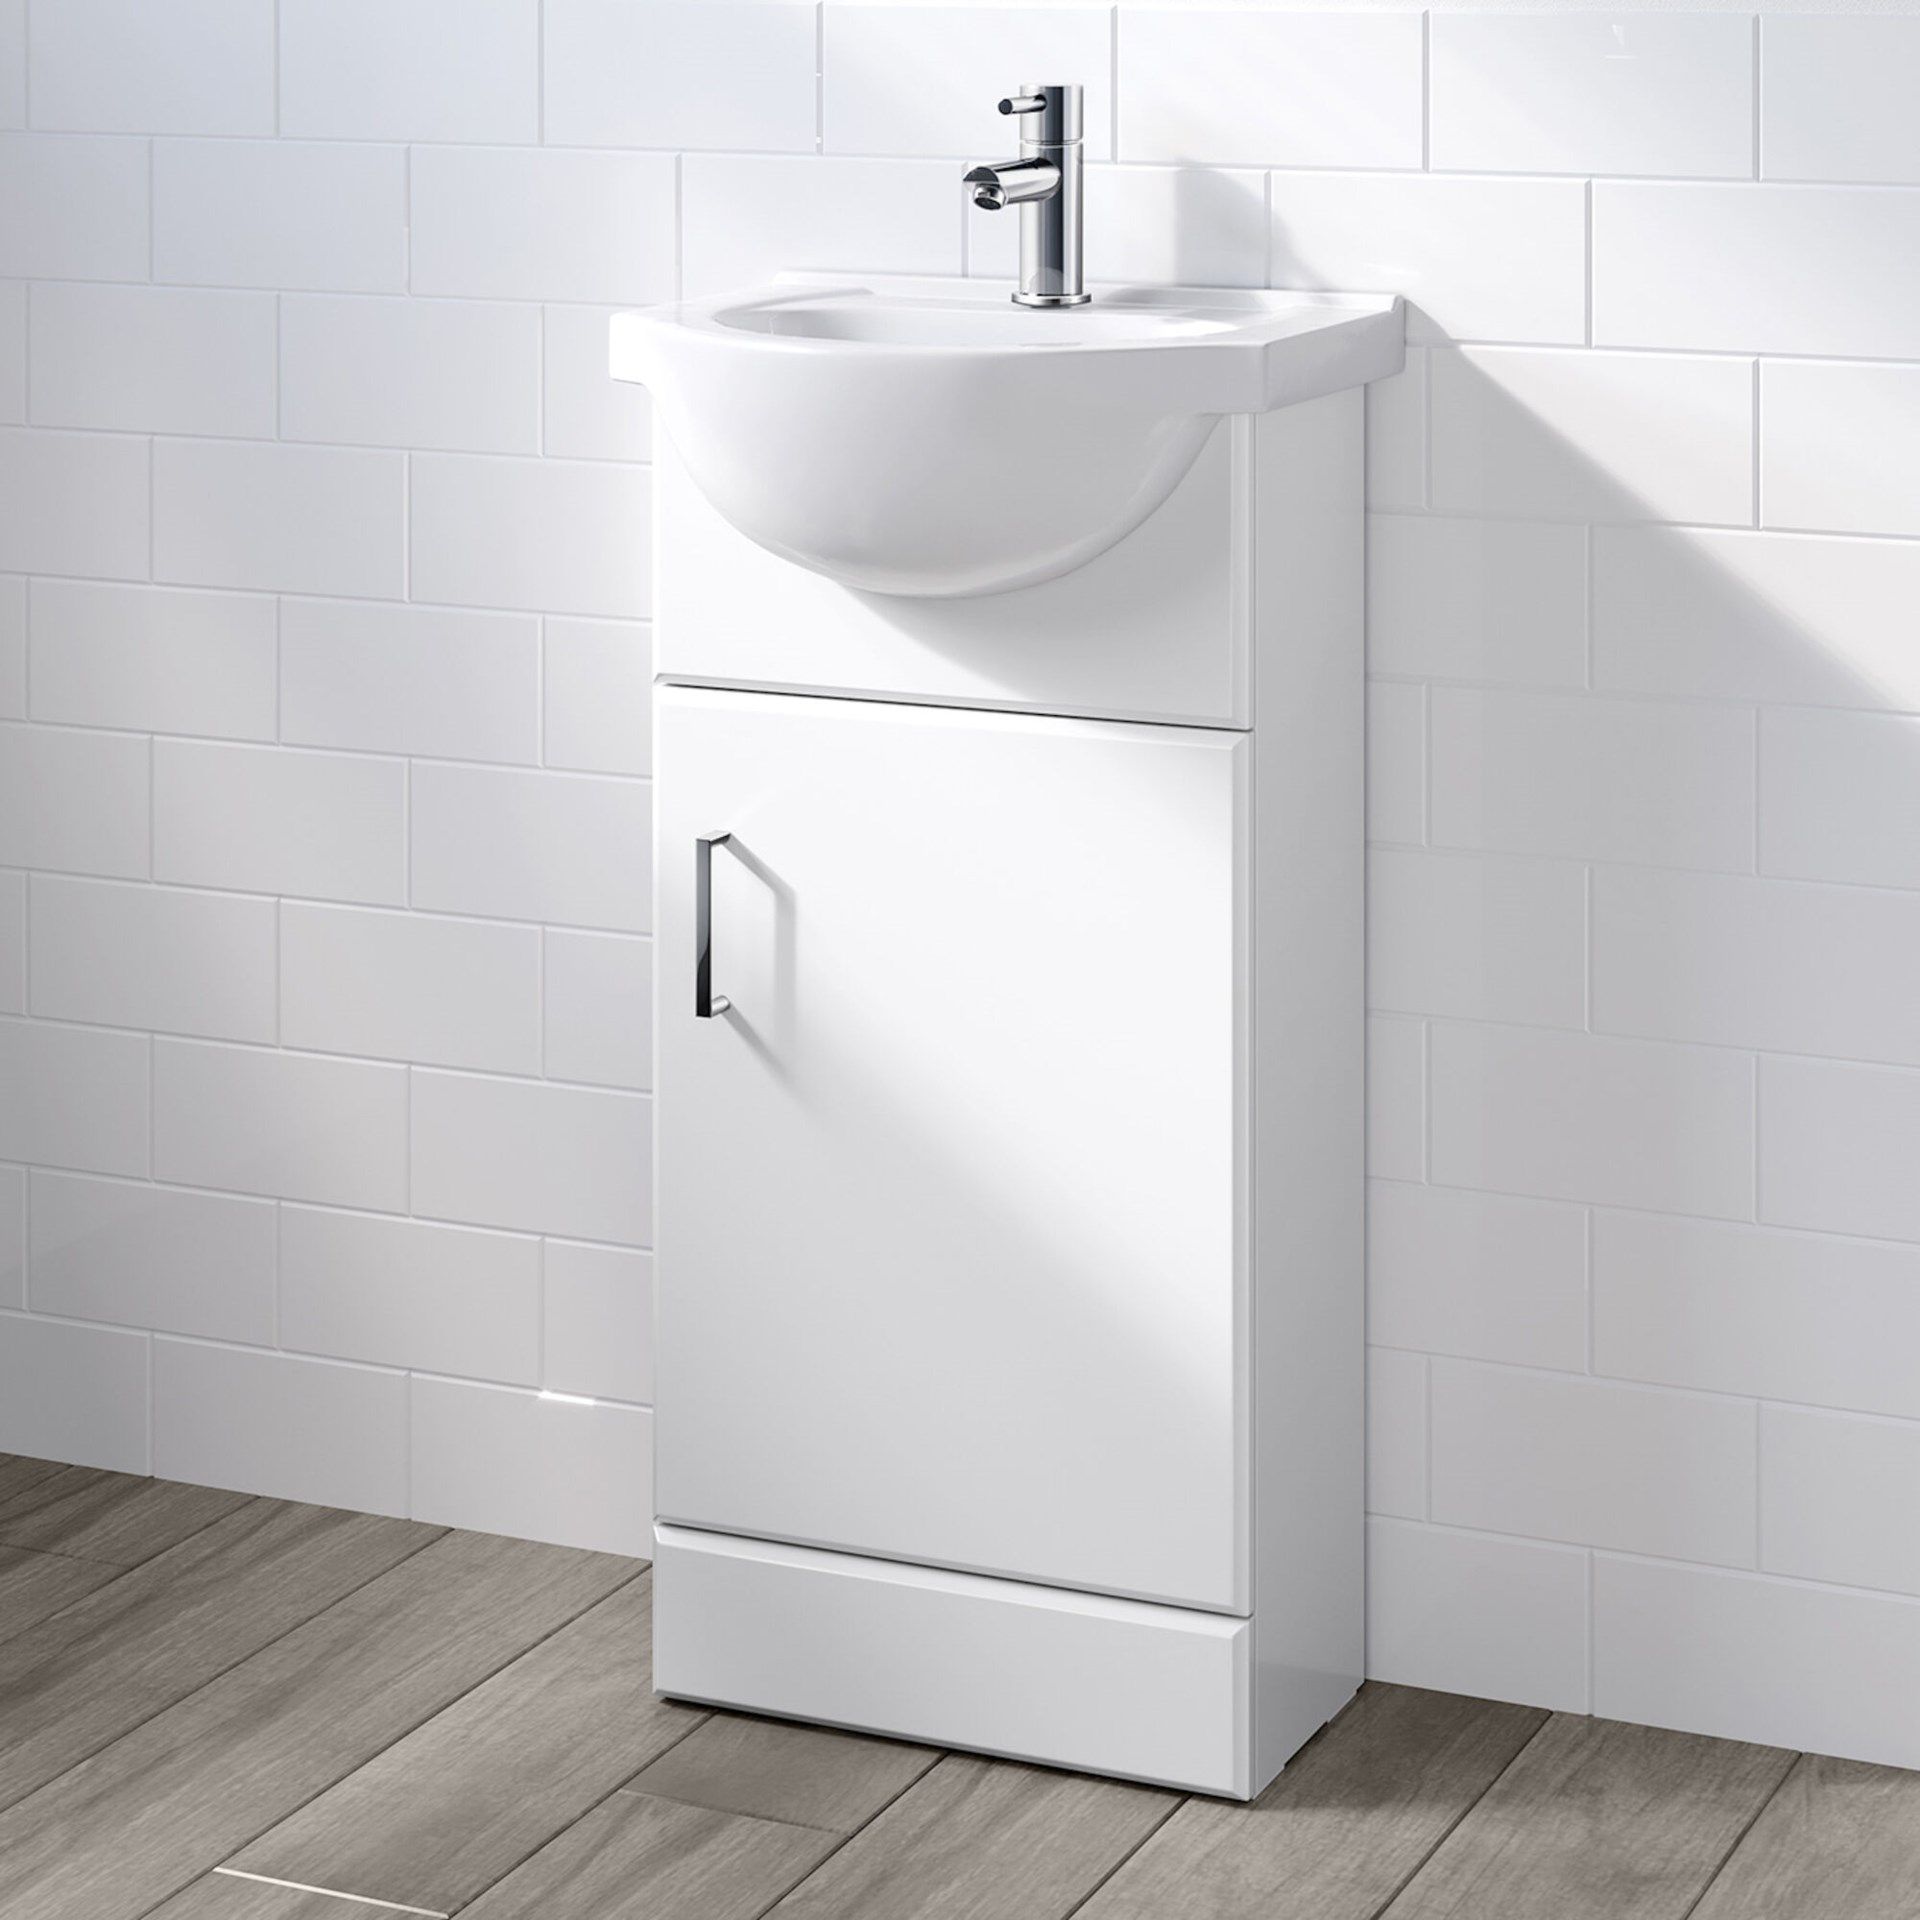 (DD114) 410mm Quartz Gloss White Built In Basin Cabinet. RRP £249.99. Comes complete with bas...